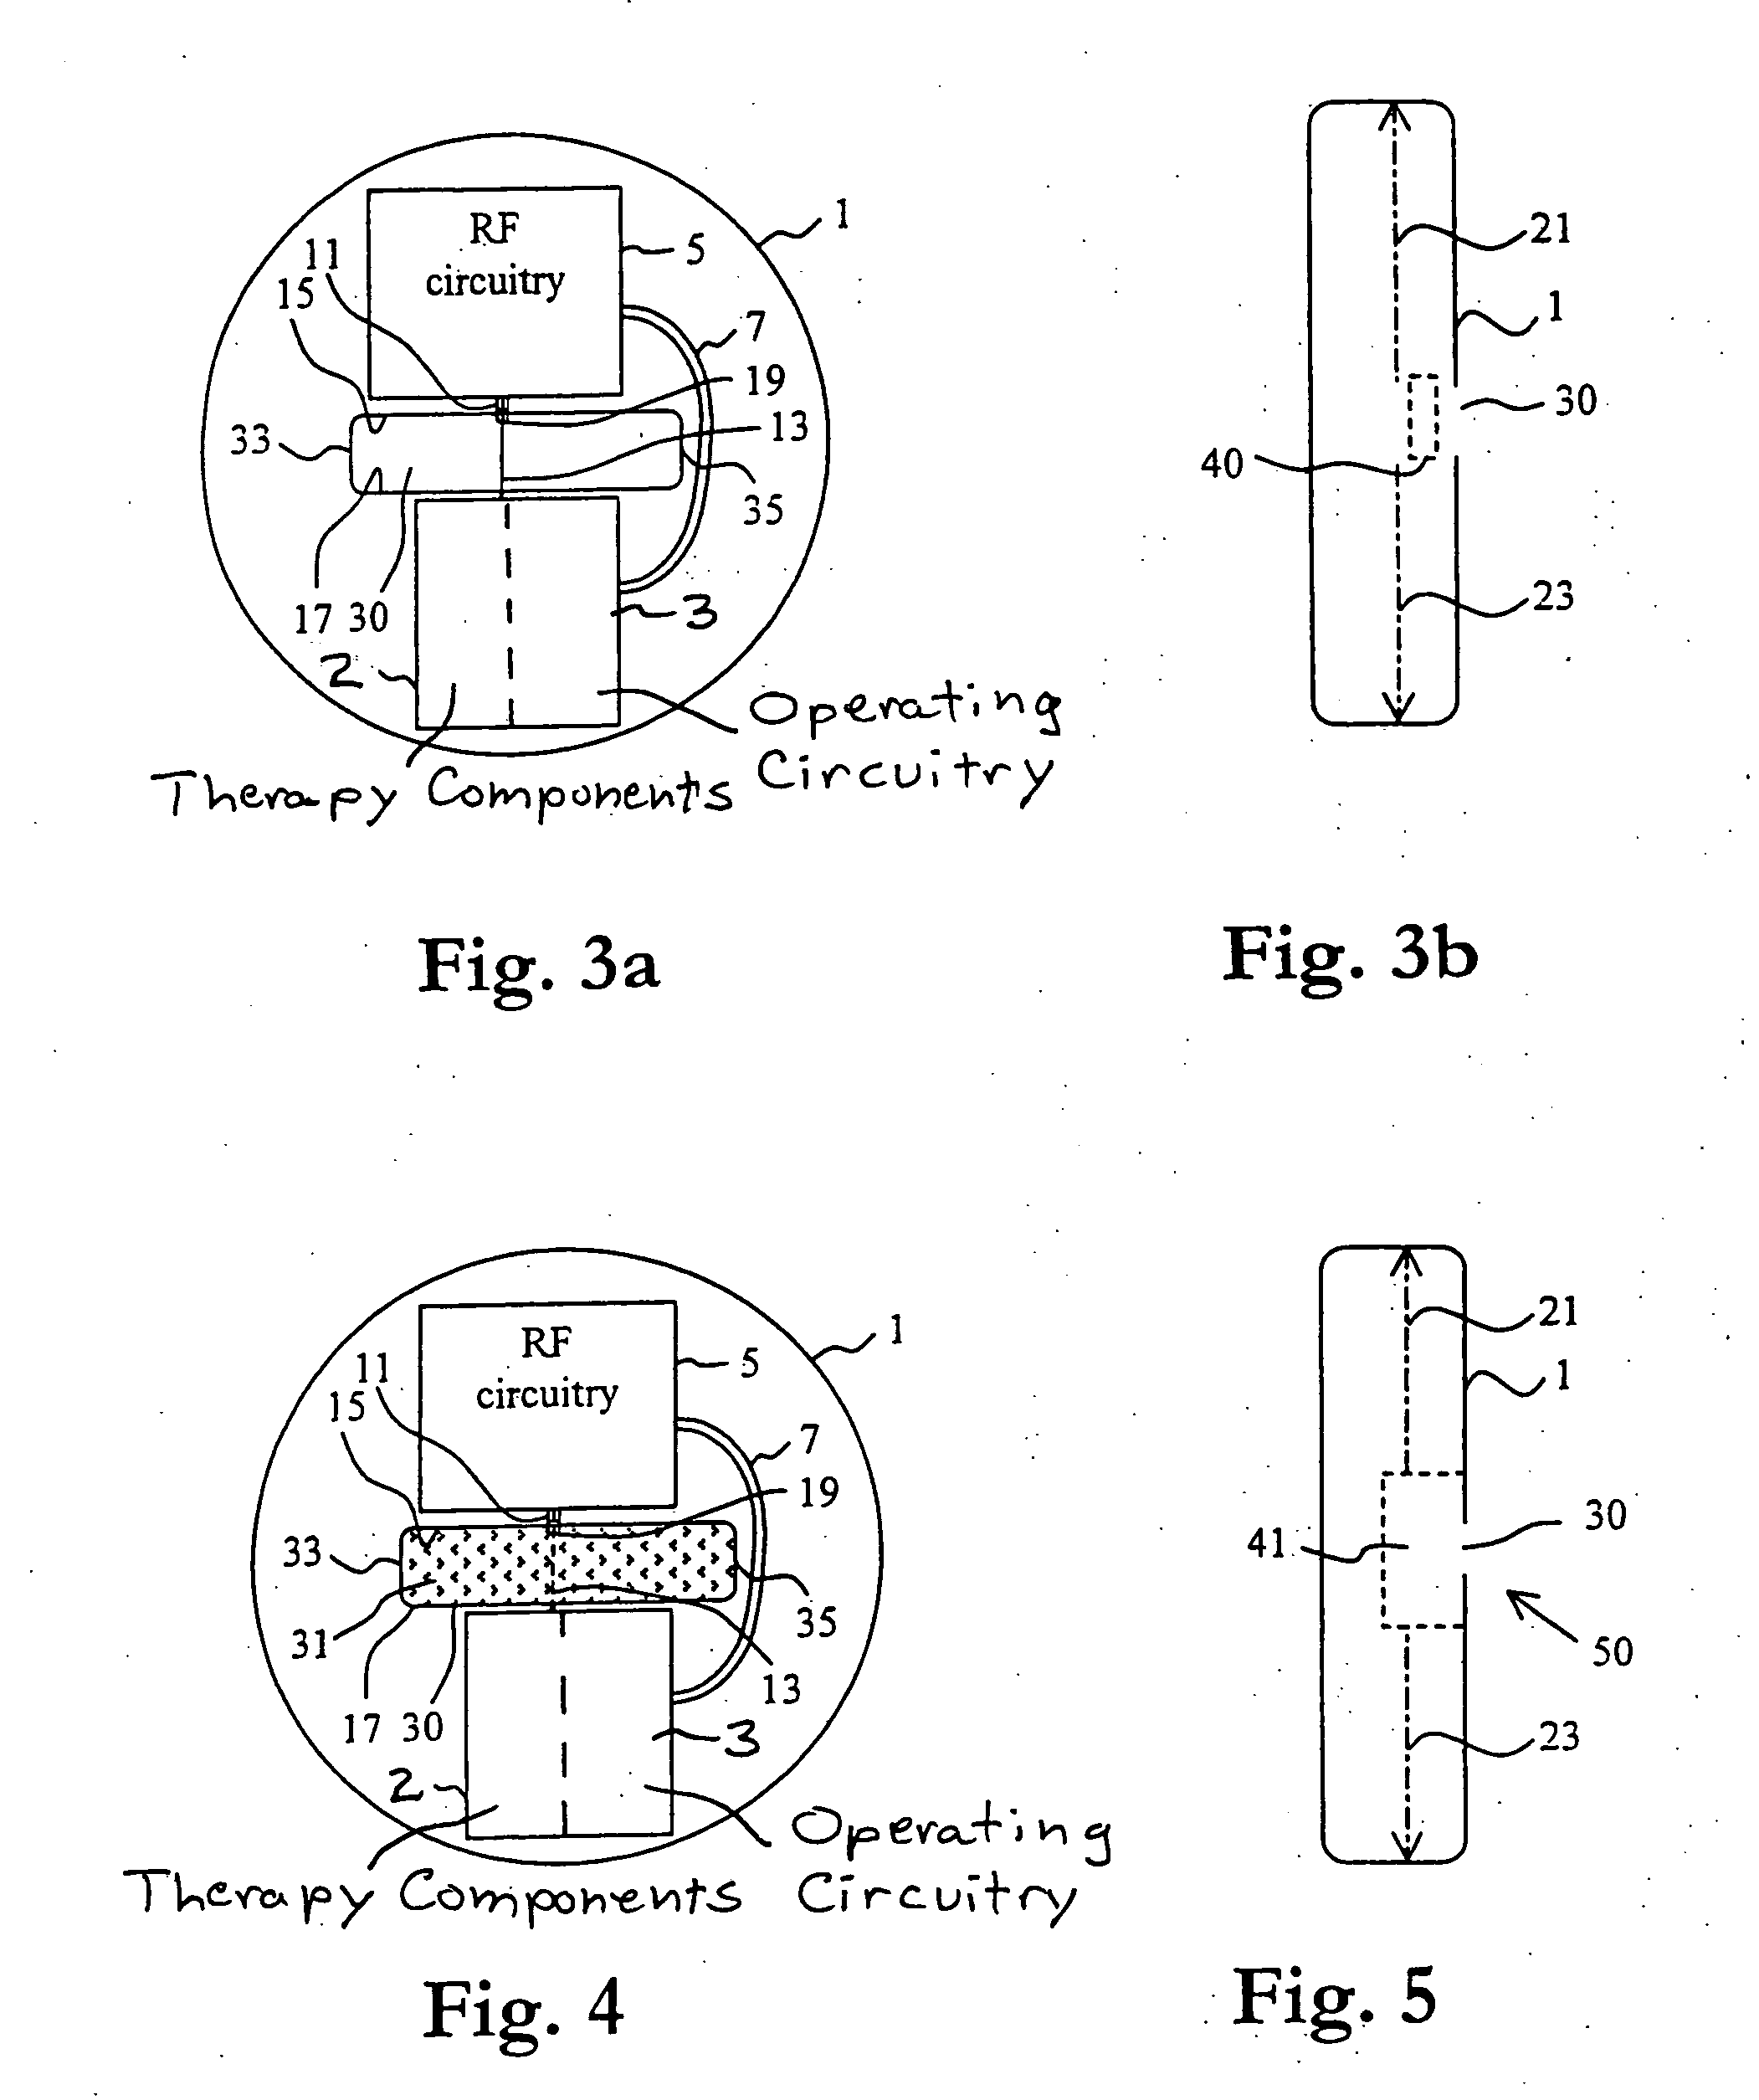 Implantable medical device with slot antenna formed therein